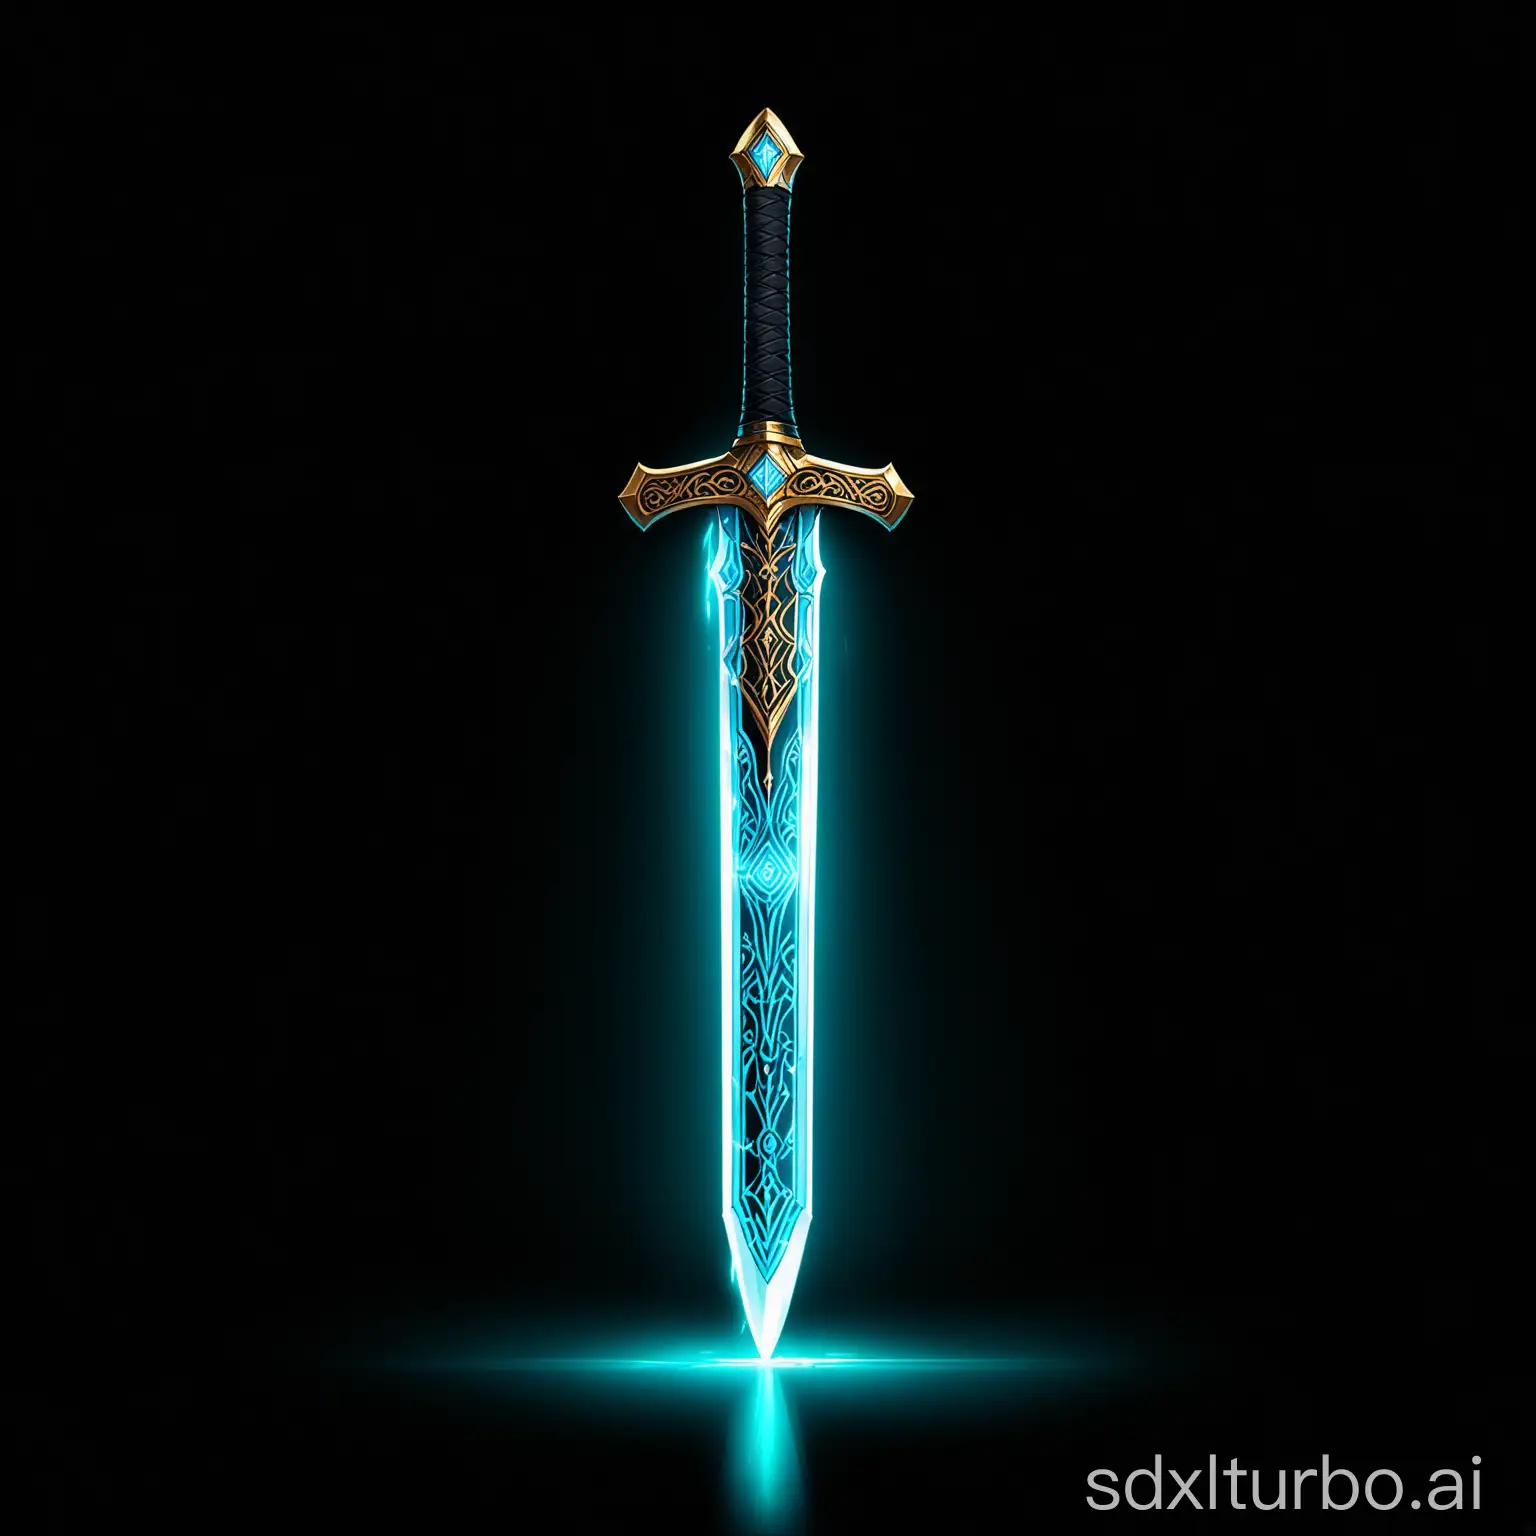 A norse lighting-infused sword on a black background